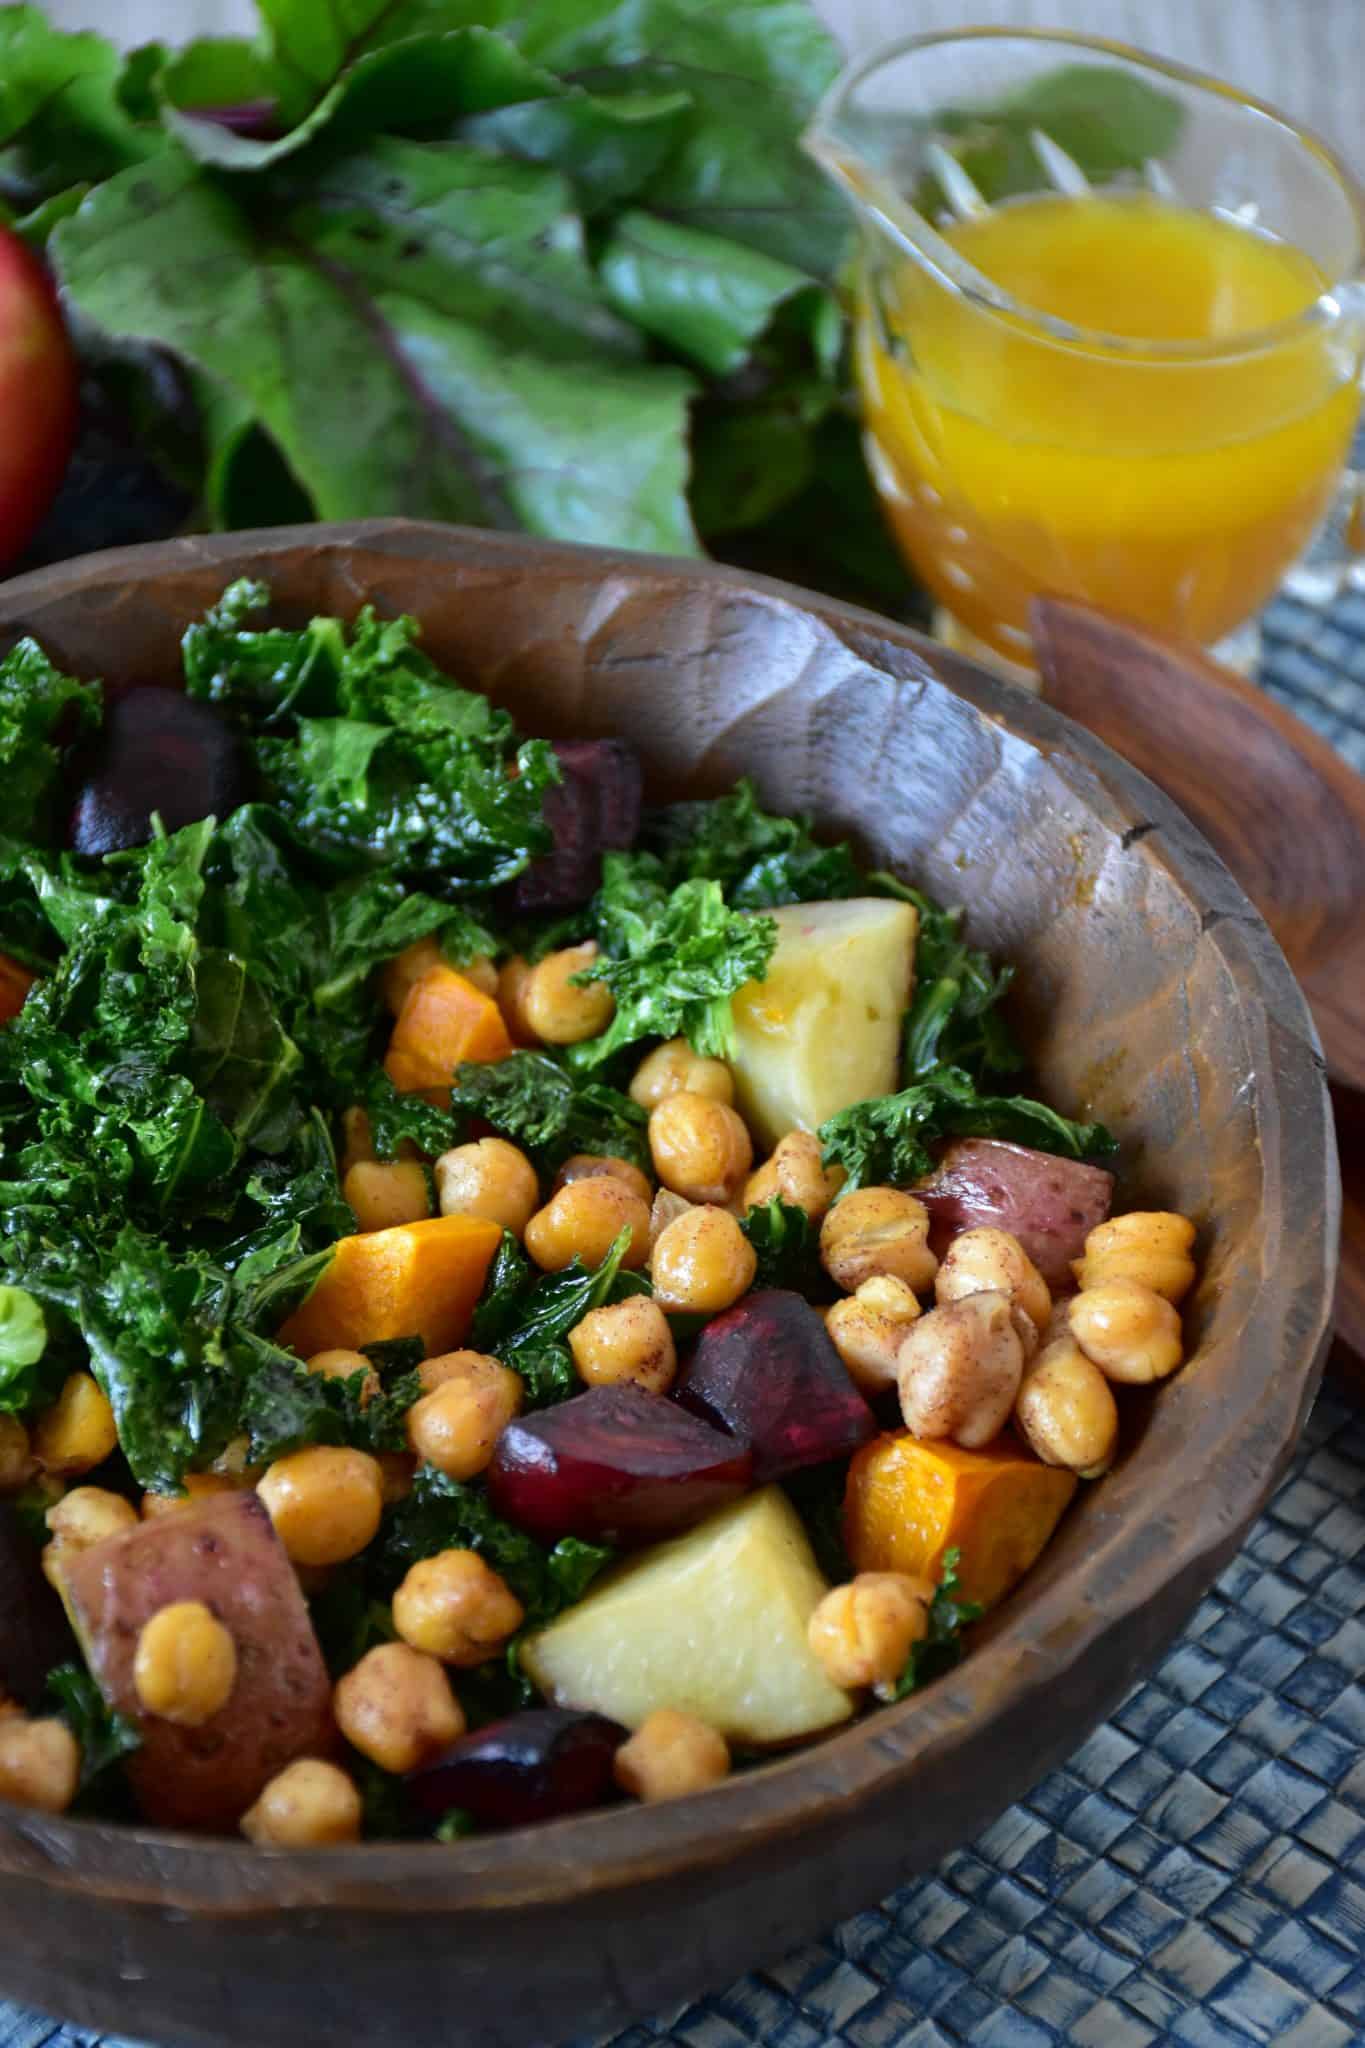 Kale salad in a wooden bowl with apple maple vinaigrette in the background.